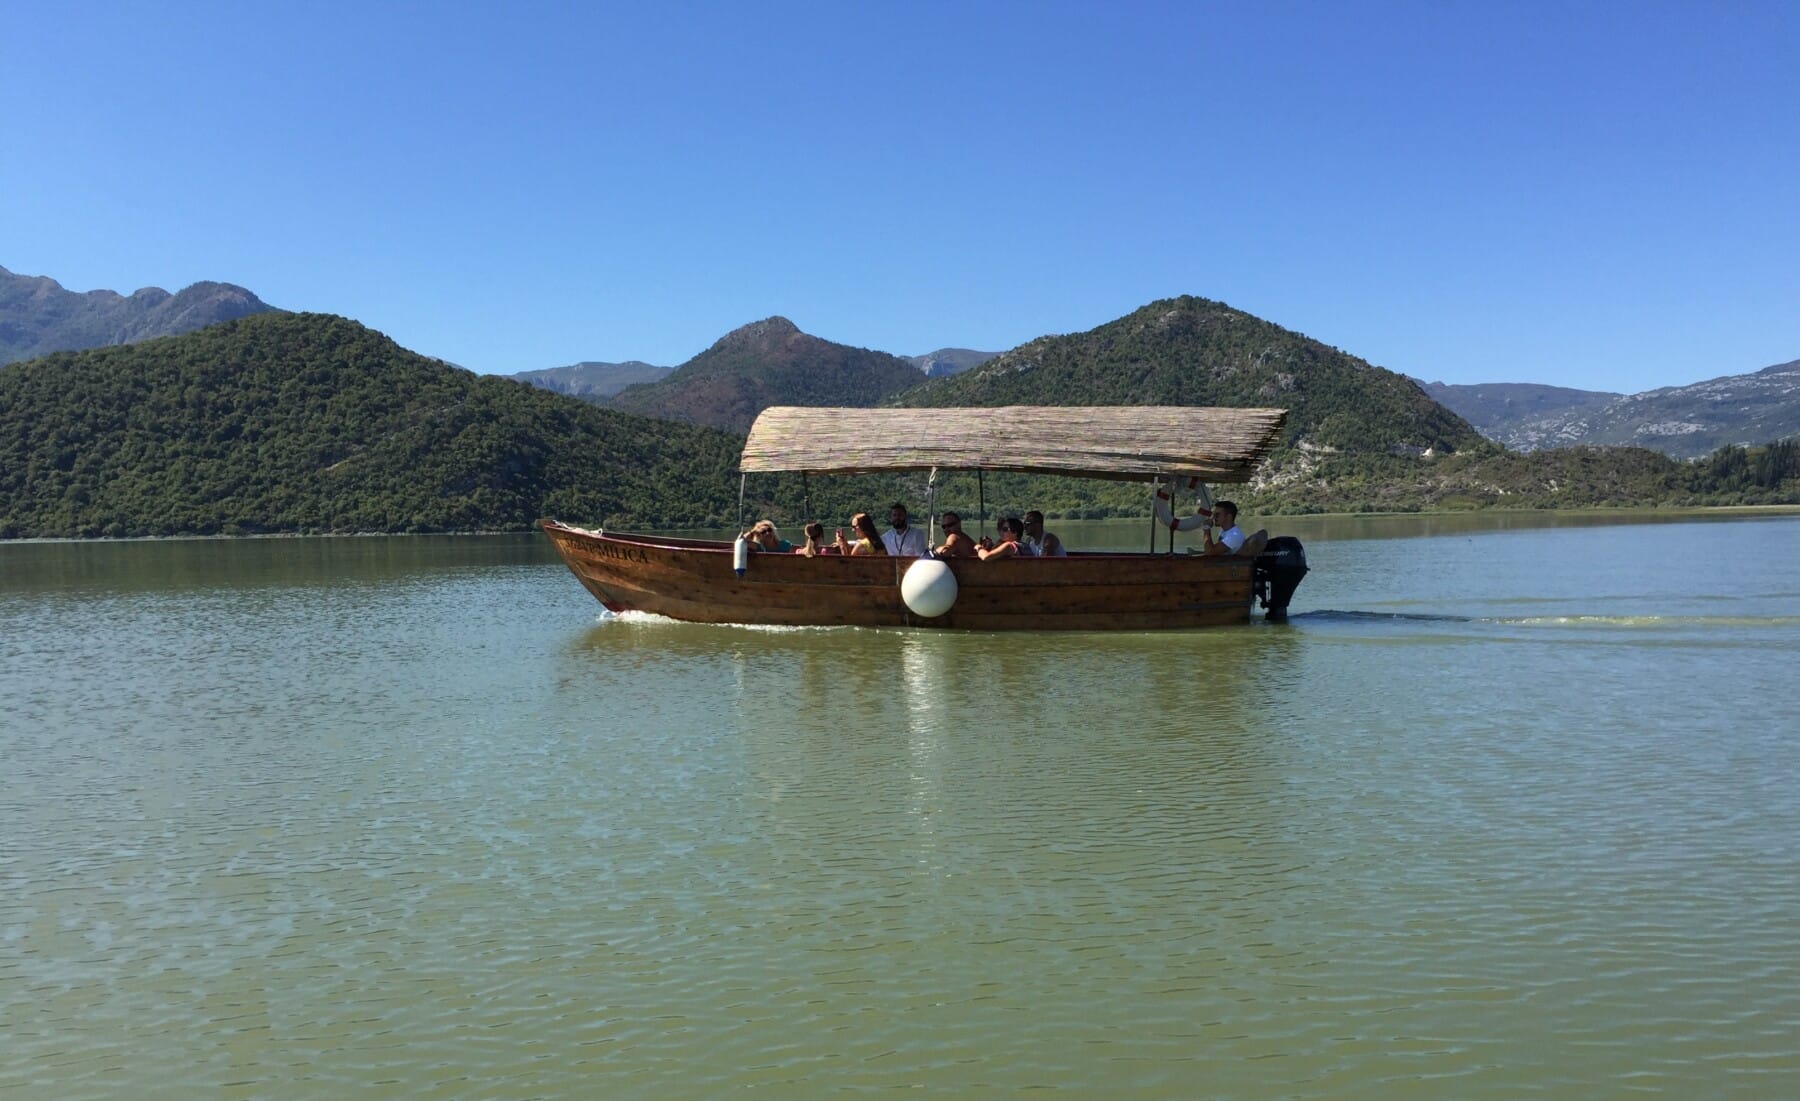 Boat with tourists on the Skadar Lake, Montenegro